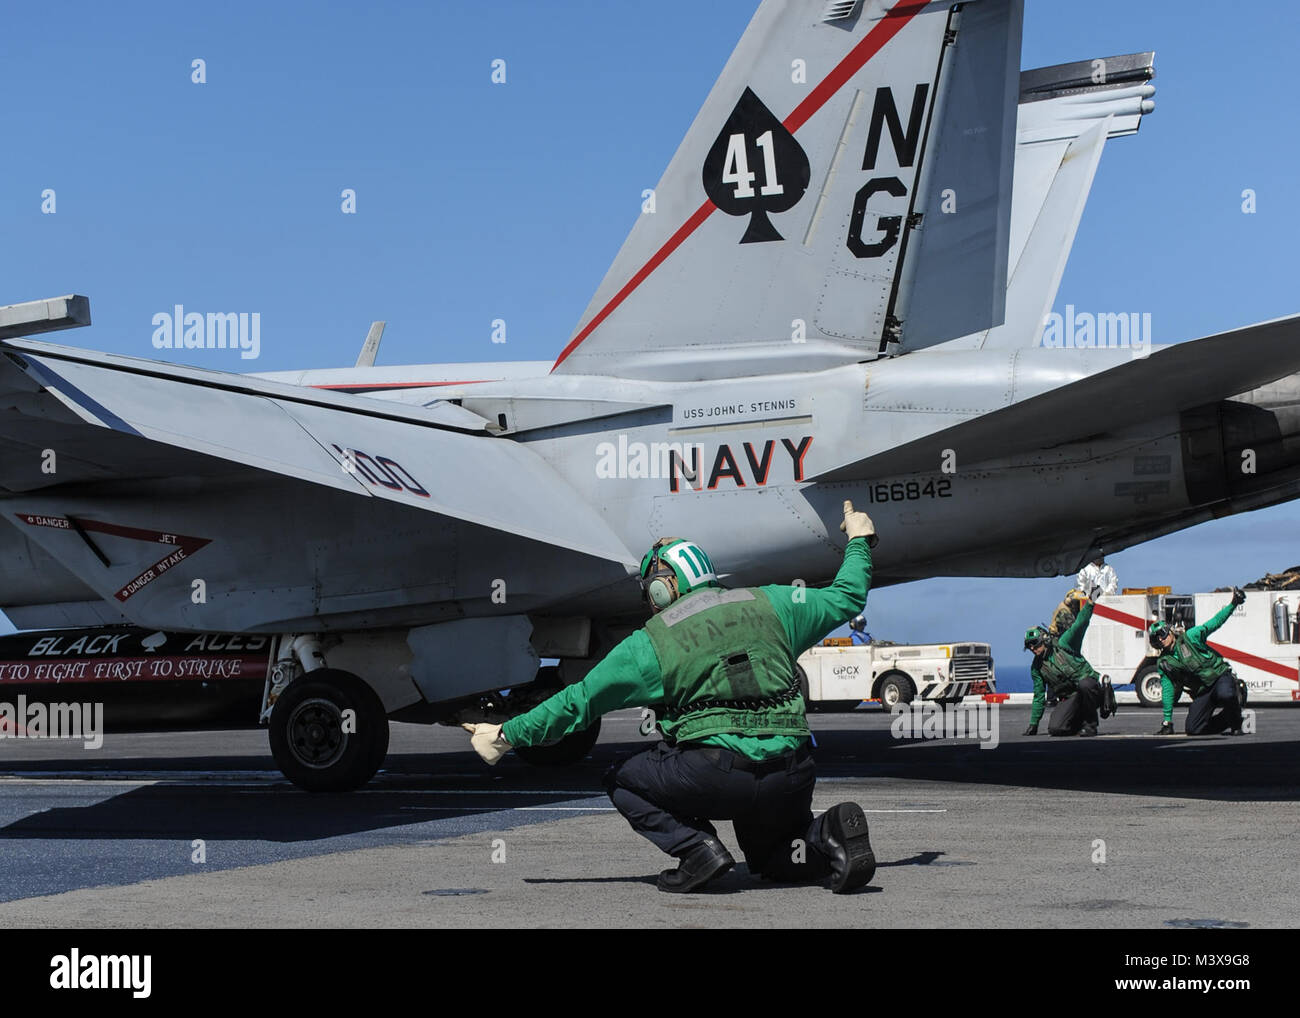 PACIFIC OCEAN (Sept. 11, 2014) Sailors prepare to launch an F/A-18F Super Hornet, assigned to the Black Aces of Strike Fighter Squadron (VFA) 41, from the flight deck of the aircraft carrier USS Nimitz (CVN 68). Nimitz is currently underway conducting routine operations and training exercises. (U.S. Navy photo by Mass Communication Specialist 3rd Class Siobhana R. McEwen/Released) 140911-N-MX772-126.jpg by USS NIMITZ (CVN 68) Stock Photo